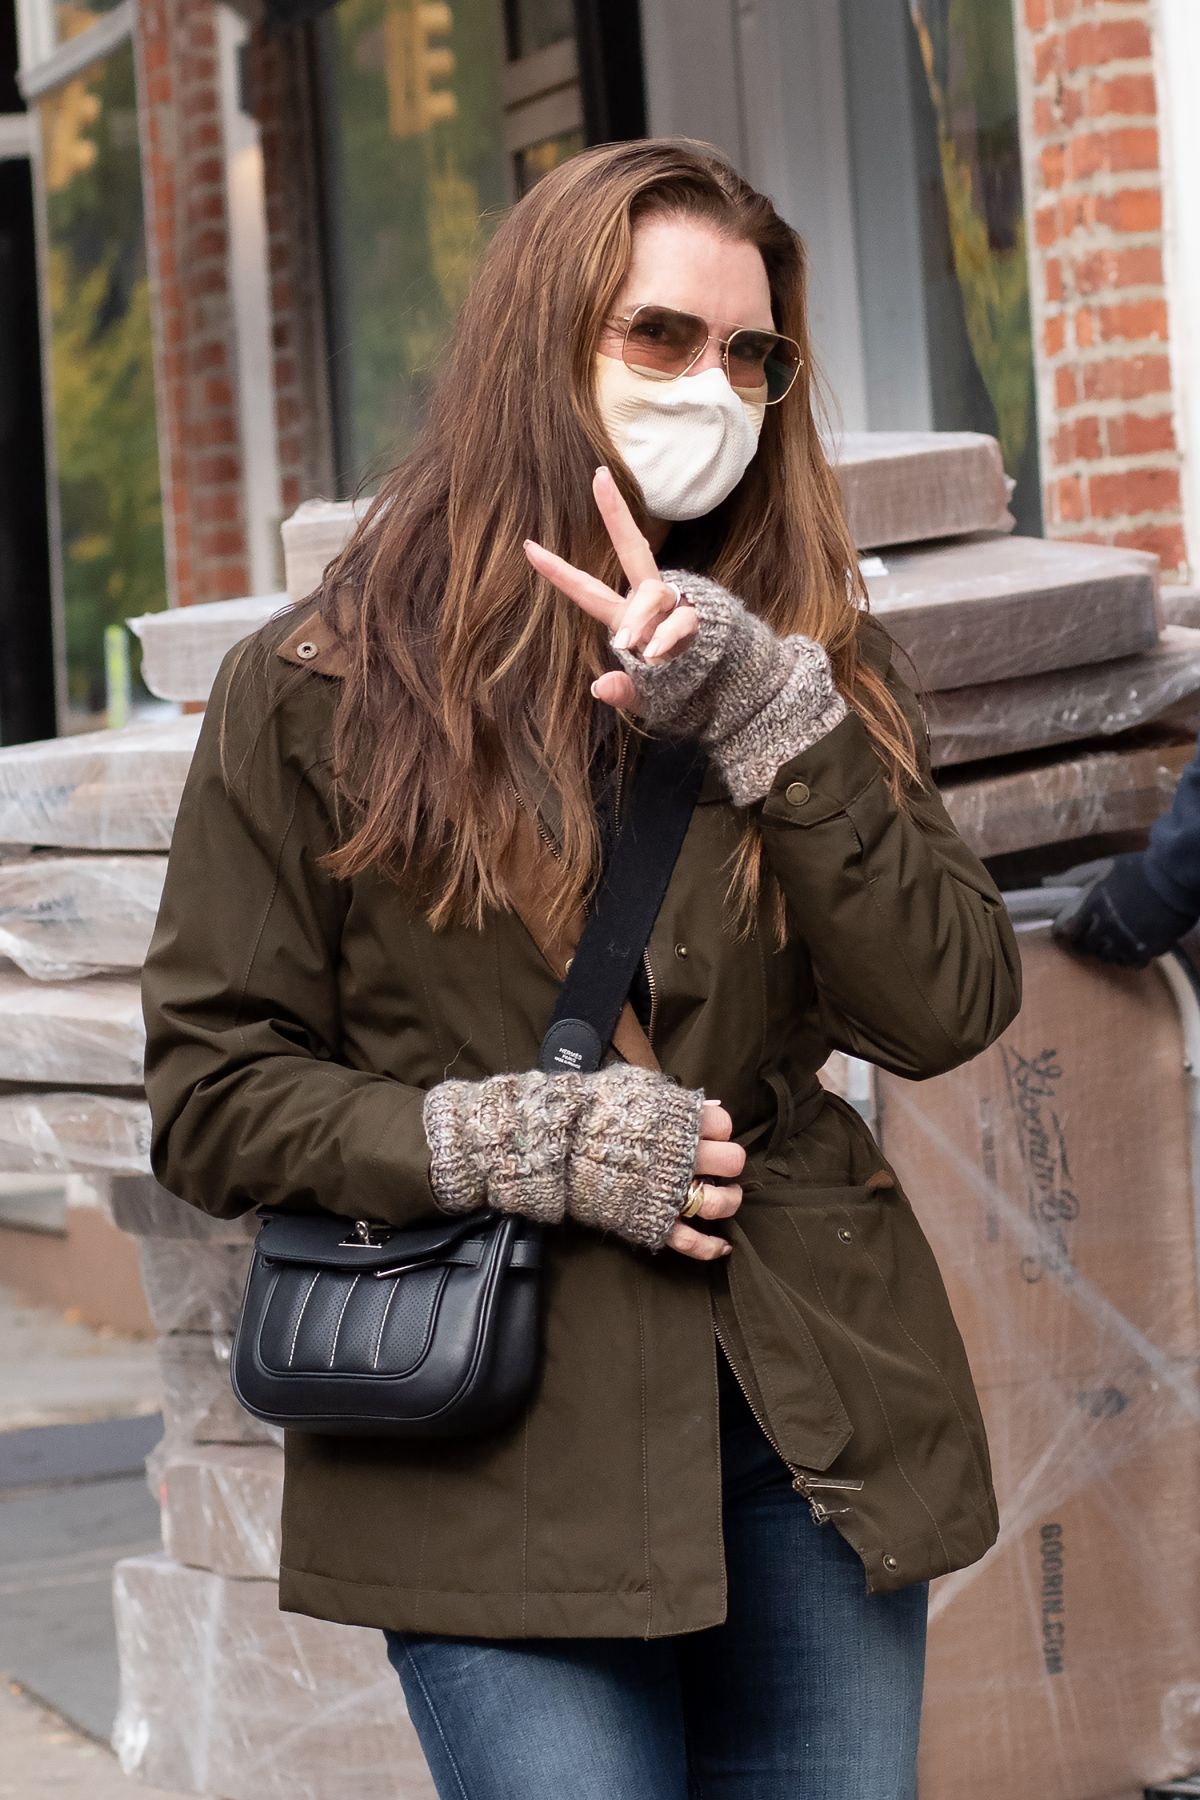 brooke-shields-out-and-about-in-new-york-11-17-2020-1.jpg